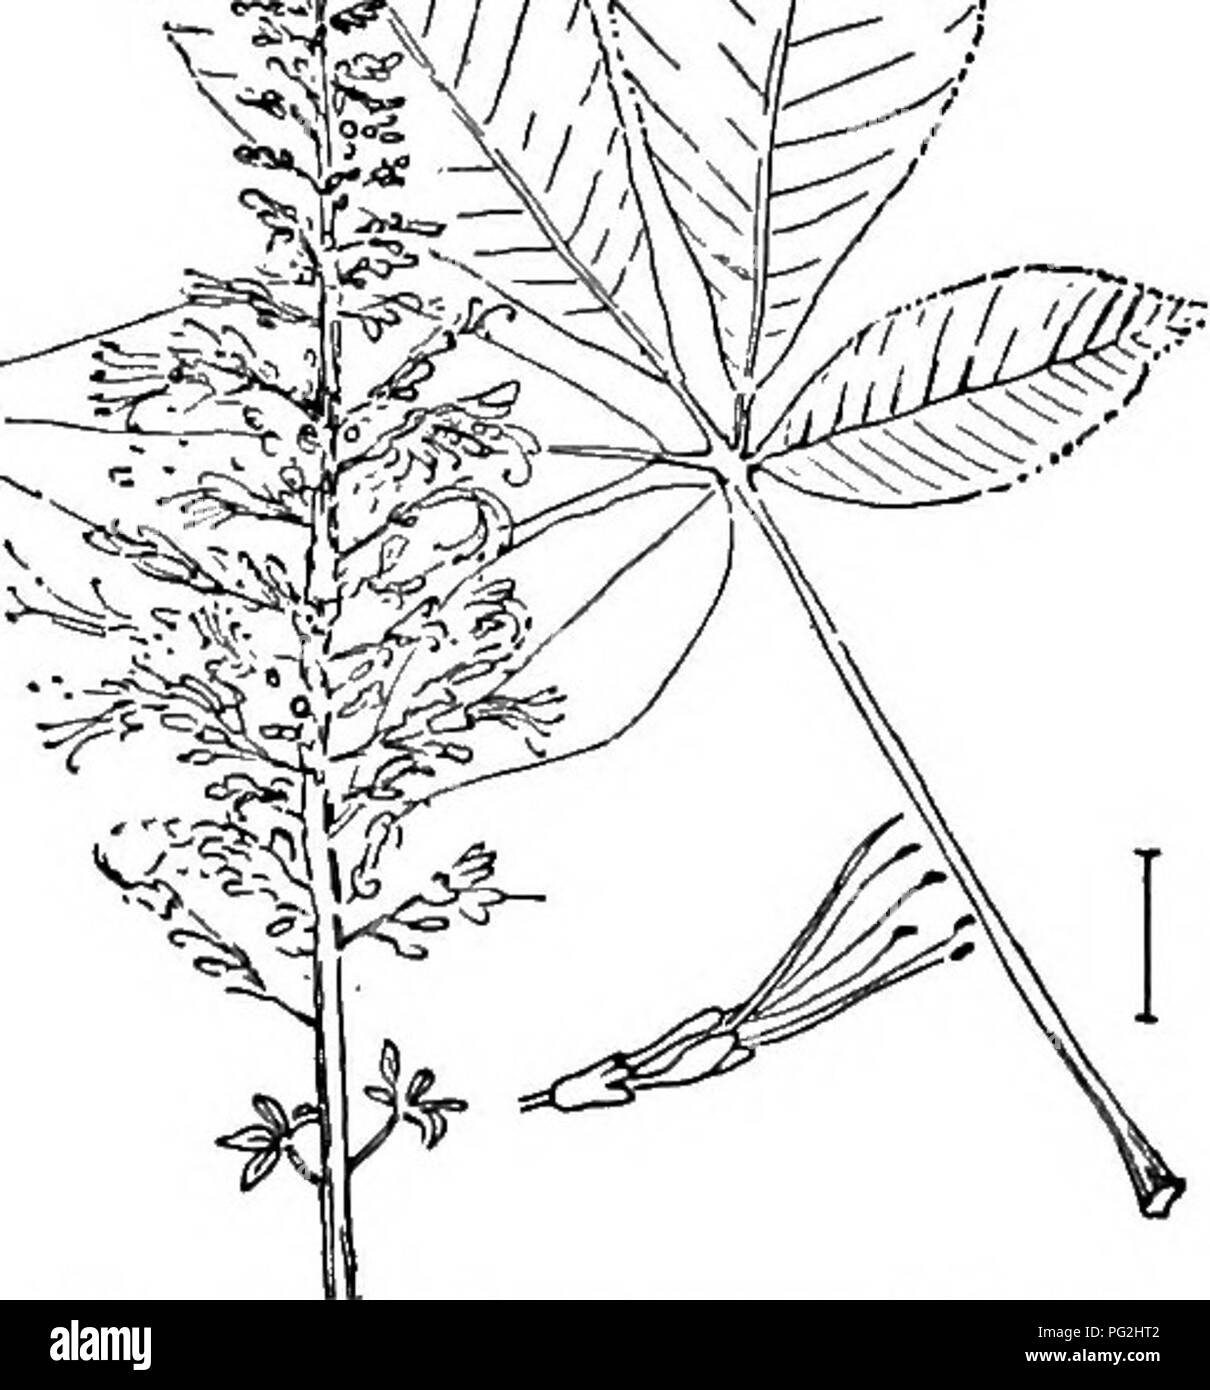 . Ornamental shrubs of the United States (hardy, cultivated). Shrubs. Fig. 99. — Chinese Flowering Chestnut. Fjg. 100. — Long-racemed Horse- chestnut. Common Jujube — Zizyphus sativa — is a shrub or small tree, often prickly, growing occasionally to the height of 30 feet. The leaves are so arranged along slender green stems as to look like compound pinnate ones but the flowers and fruit in their axils prove the leaves are simple. These leaves are from 1 to 3 inches long, dark glossy-green above, whitish below, oblique at base and finely notched. The fruit is short-stalked, dark red to black, i Stock Photo